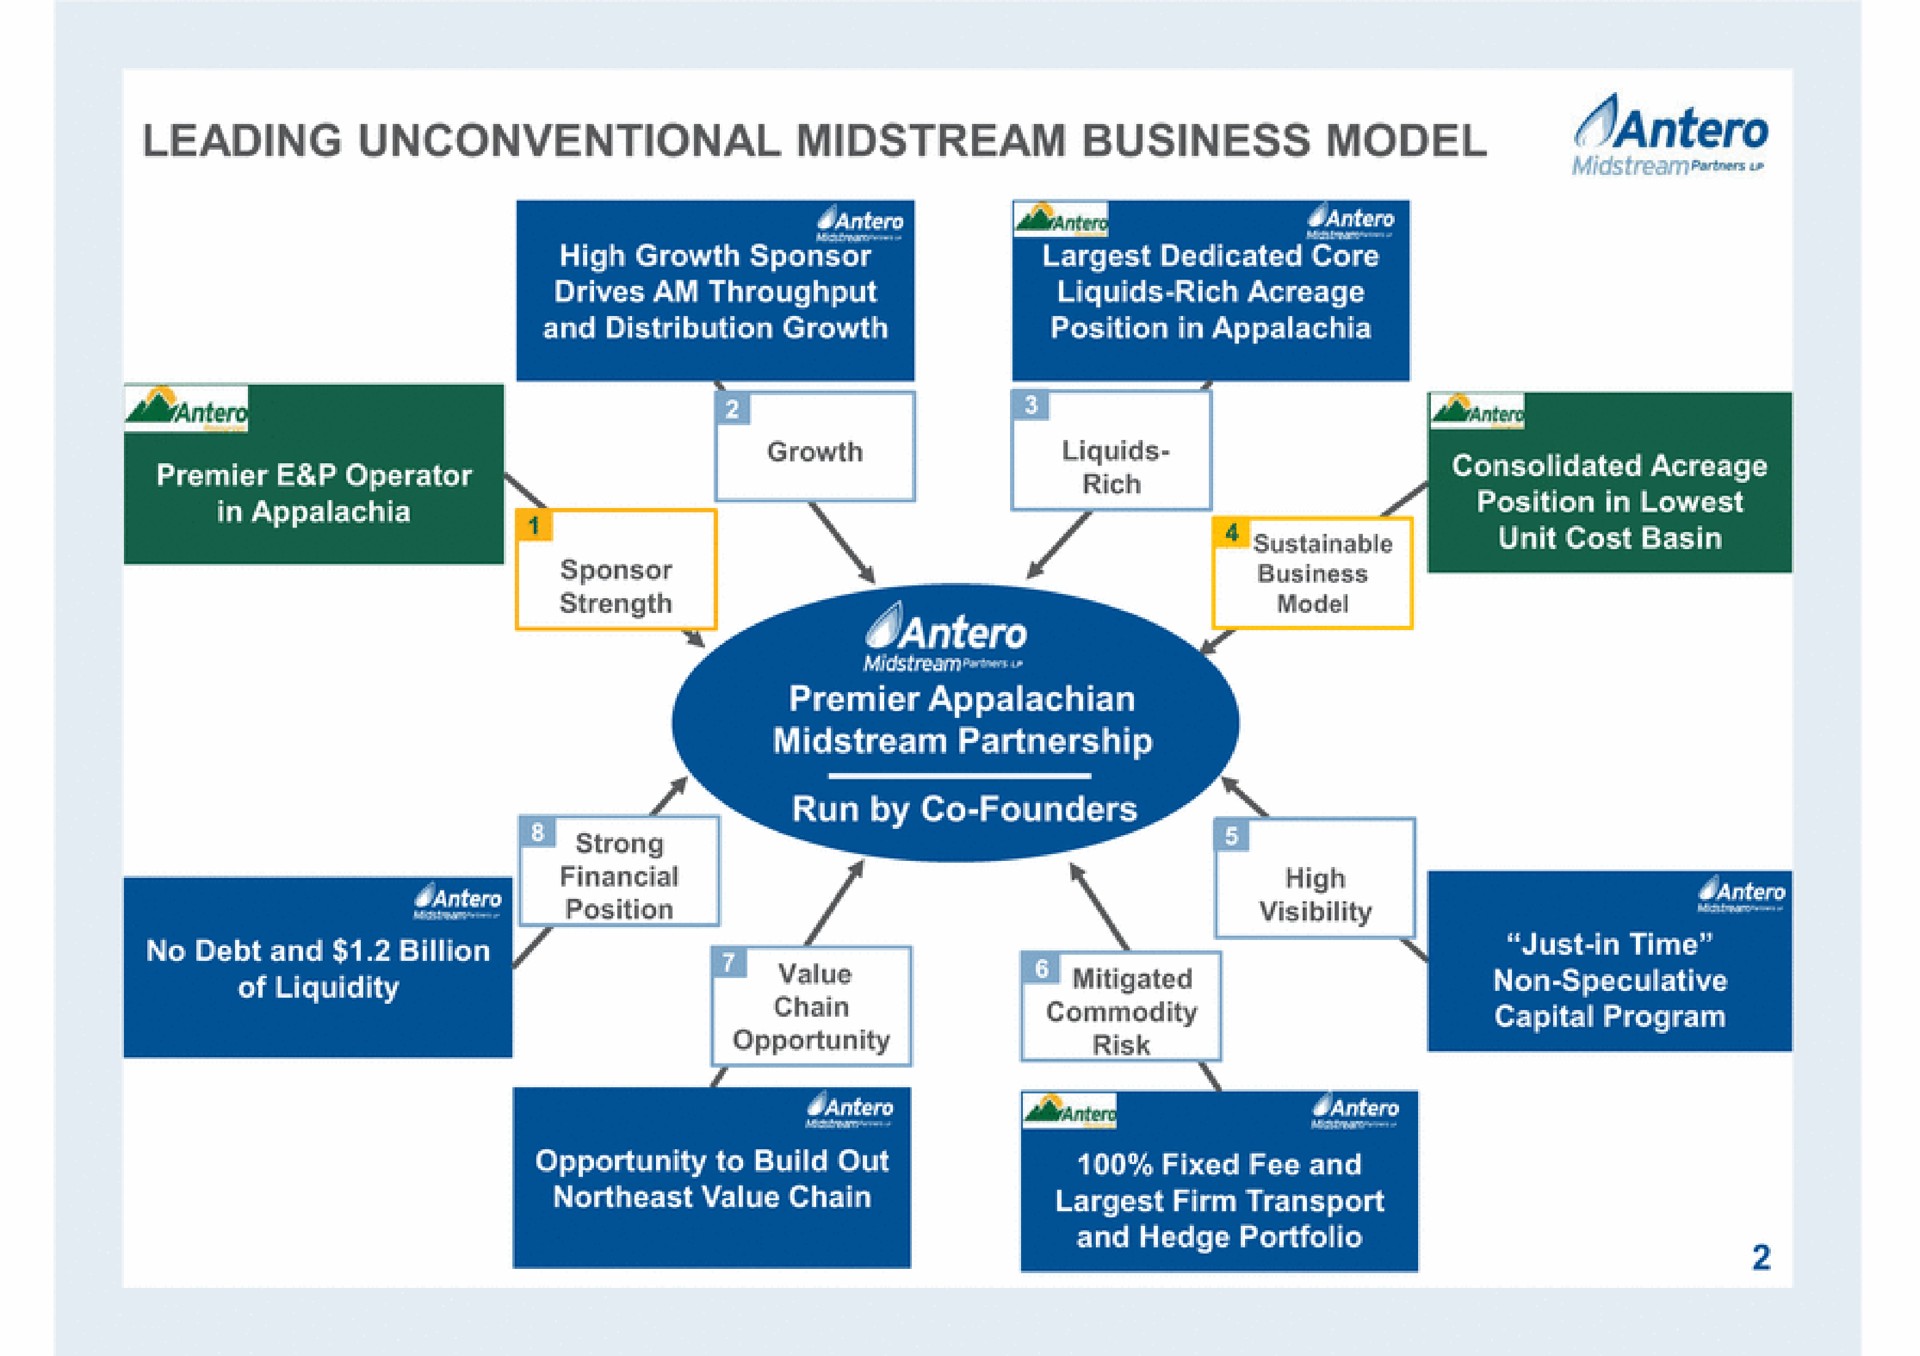 leading unconventional midstream business model midstream partnership run by founders sustainable unit cost basin high pam chain opportunity mitigated commodity risk darter non speculative capital program | Antero Midstream Partners